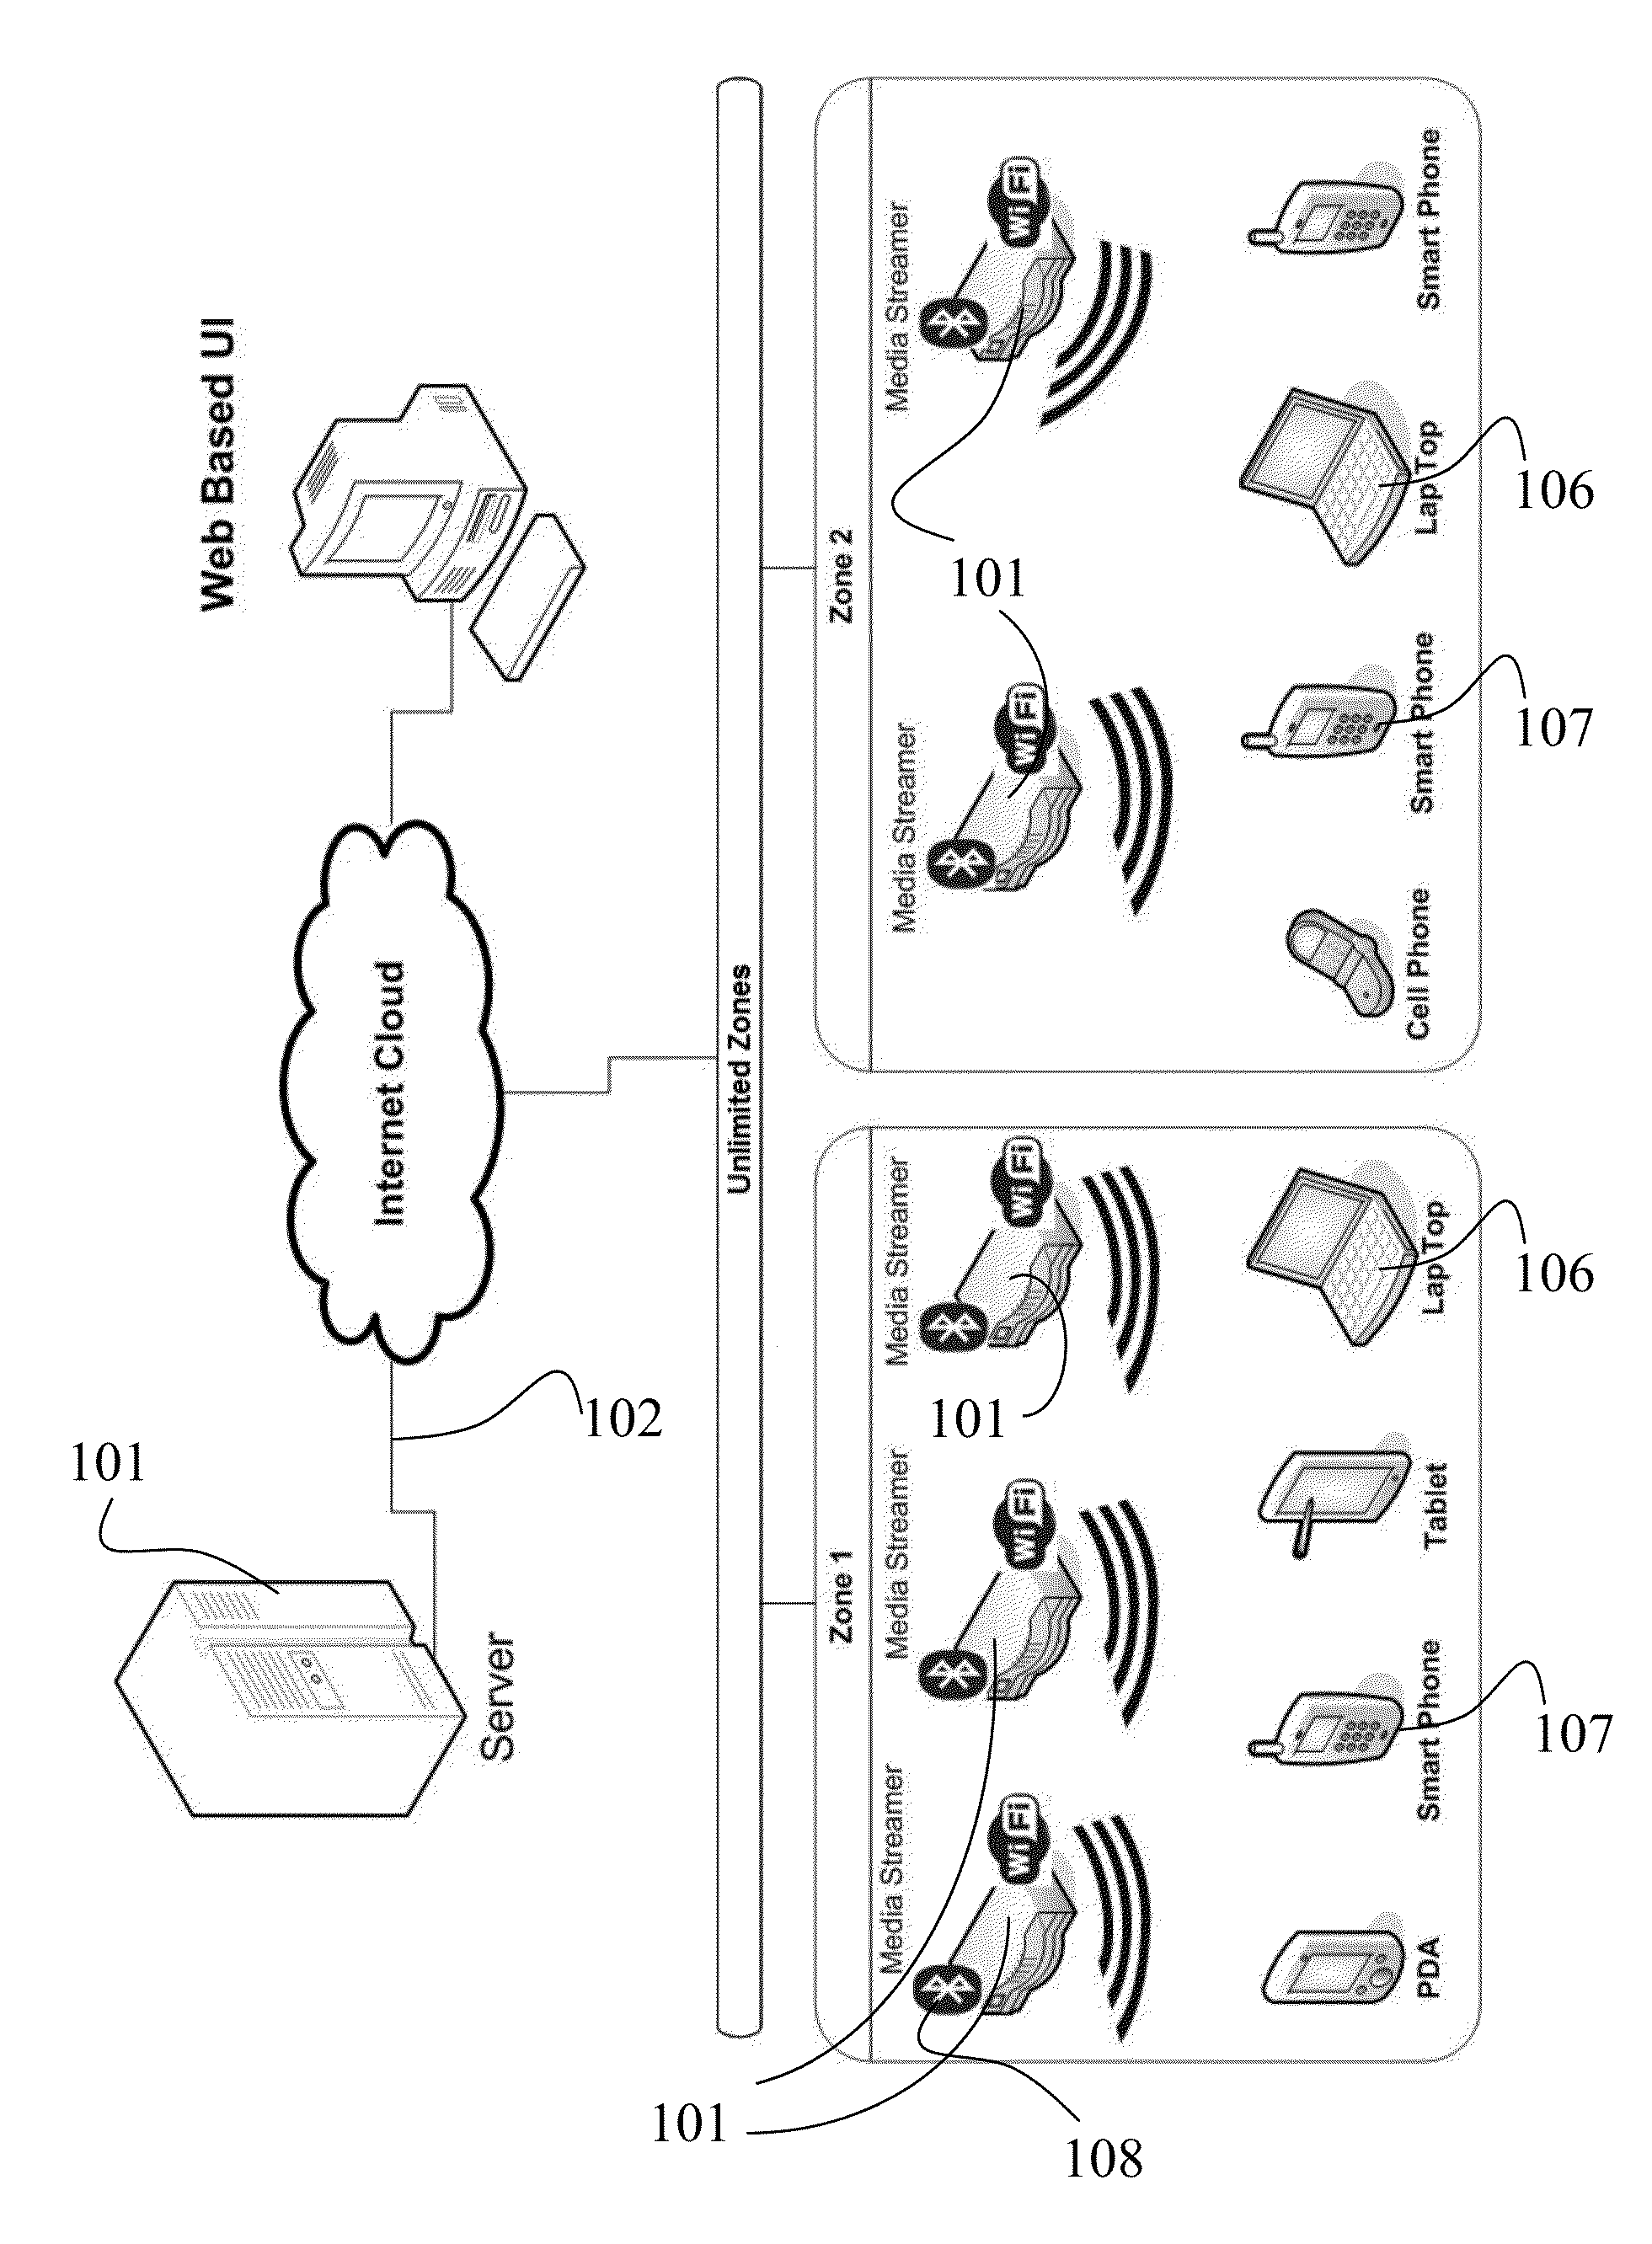 System and method for targeted location-based advertising